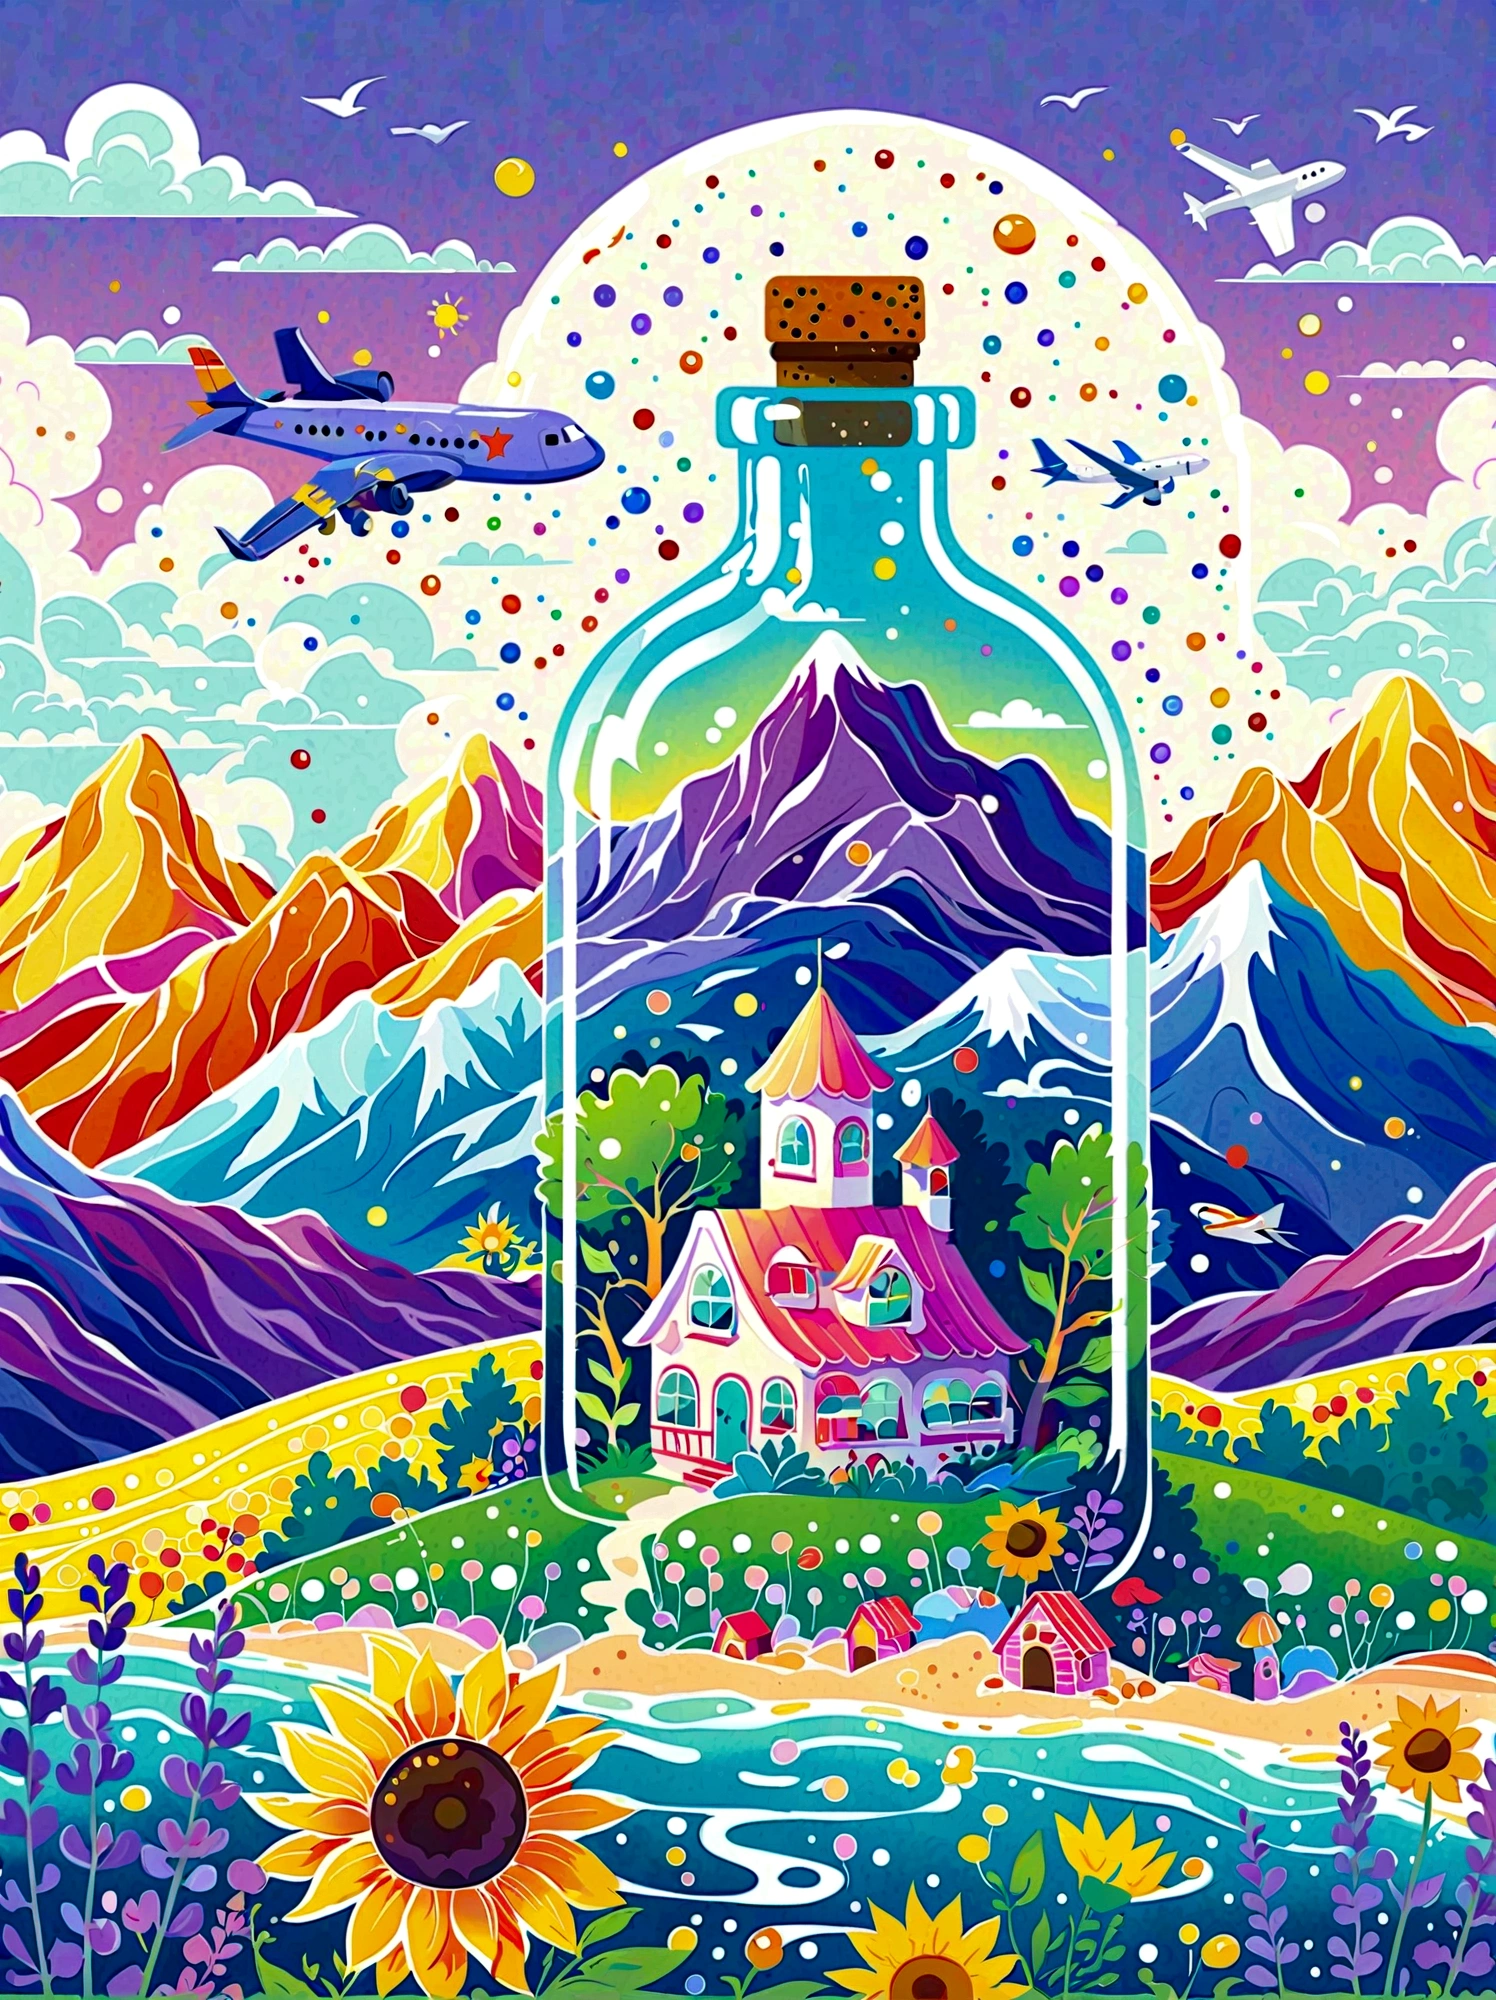 (flat, user interface vector style), (world in a bottle), heavenly colors, colorful fantasy candy house, fairy tale world, spring, seaside, rios, tree house, sunflower field, lavender, mountains, peaks, big trees, (simple illustration), (smooth line art: 1.2), (minimalism), white background, (graphic design aesthetics), (flat illustration), (Plane illustration)